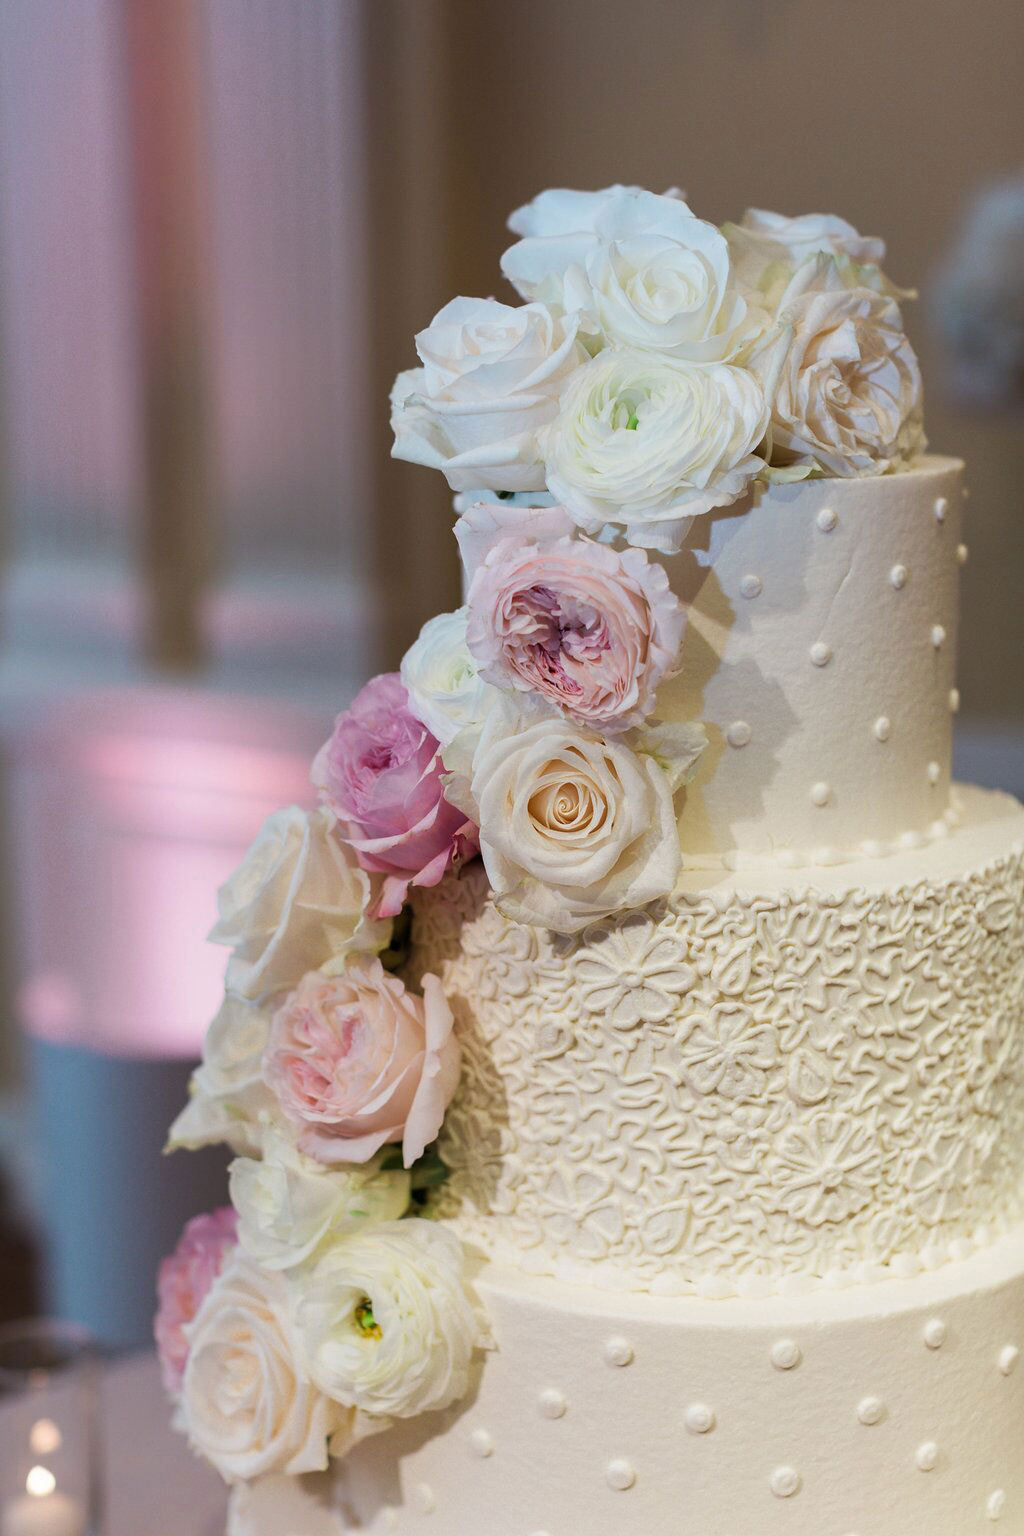 White wedding buttercream cake with blush and white blooms